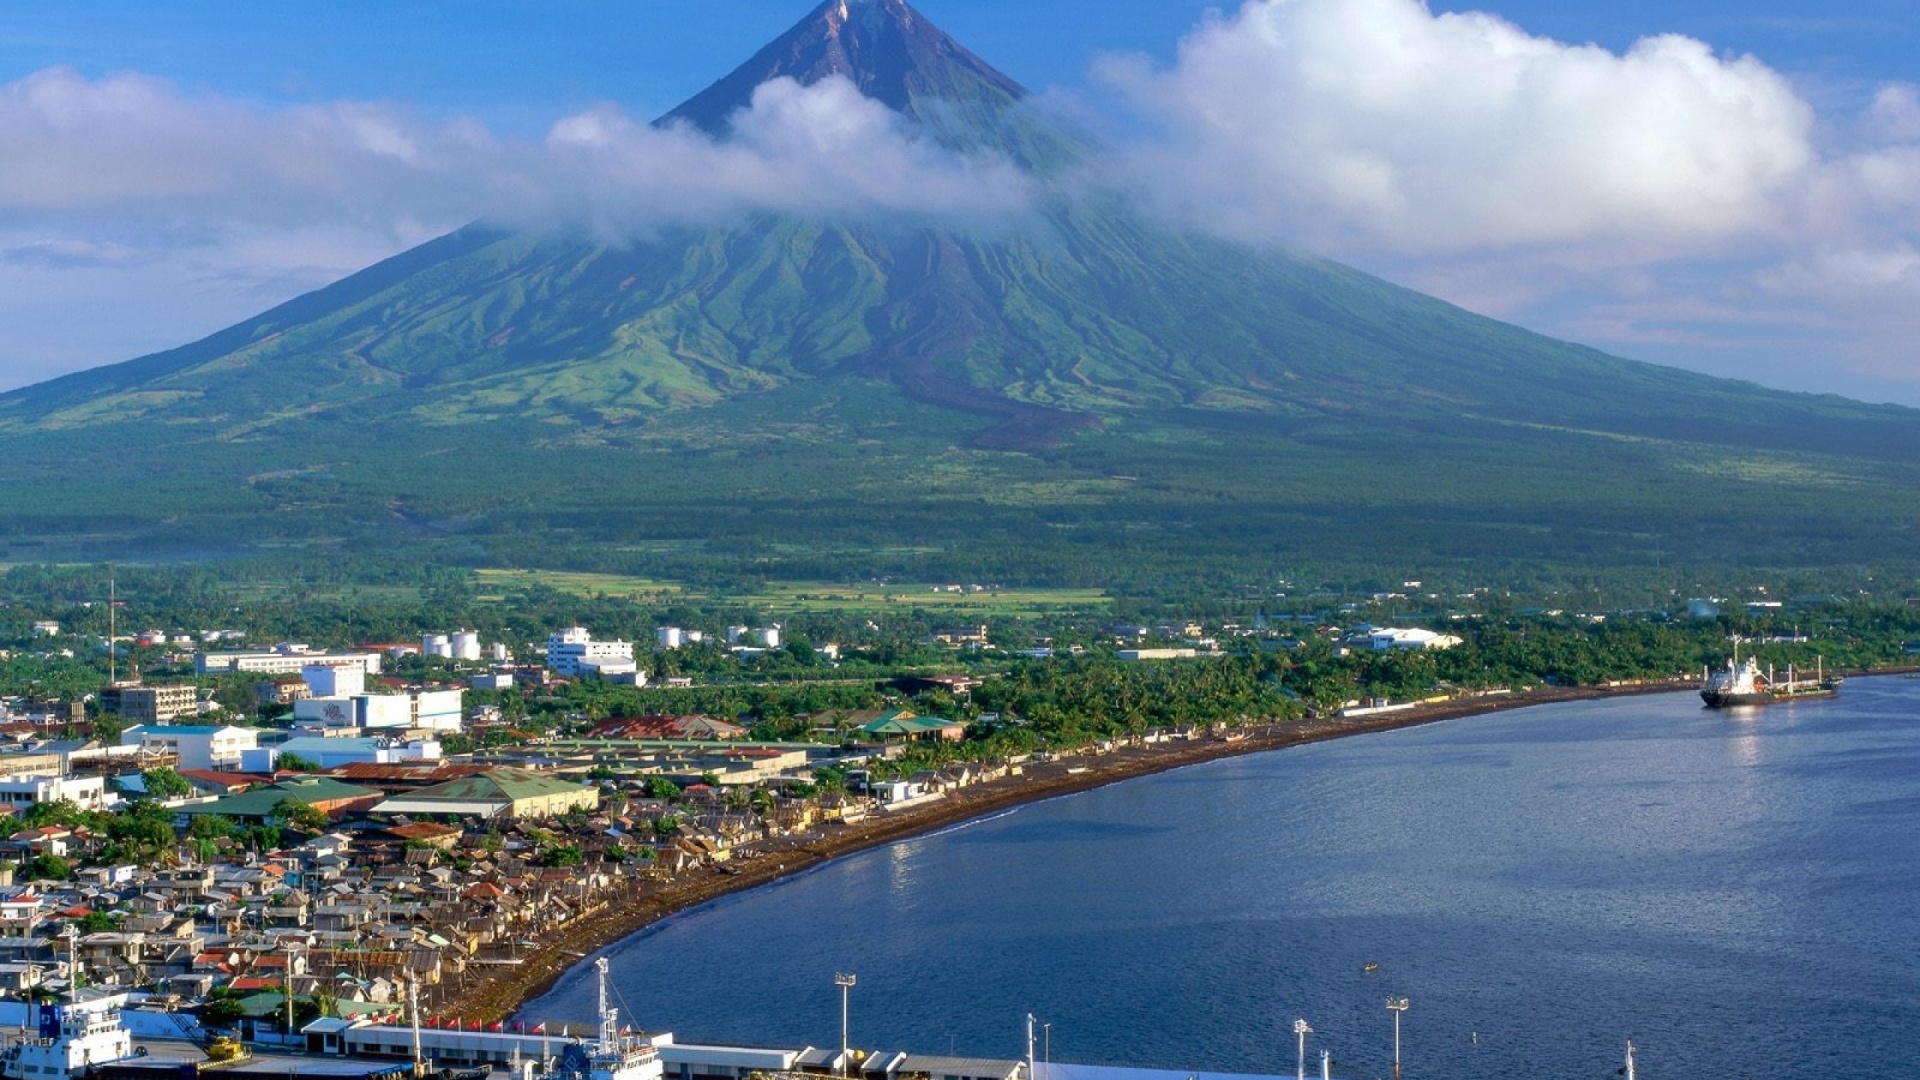 Free download 1920x1080 Philippines Mayon Volcano desktop PC and Mac wallpaper [1920x1080] for your Desktop, Mobile & Tablet. Explore Philippines Desktop Wallpaper. Philippines Flag Wallpaper, Free Nature Desktop Wallpaper